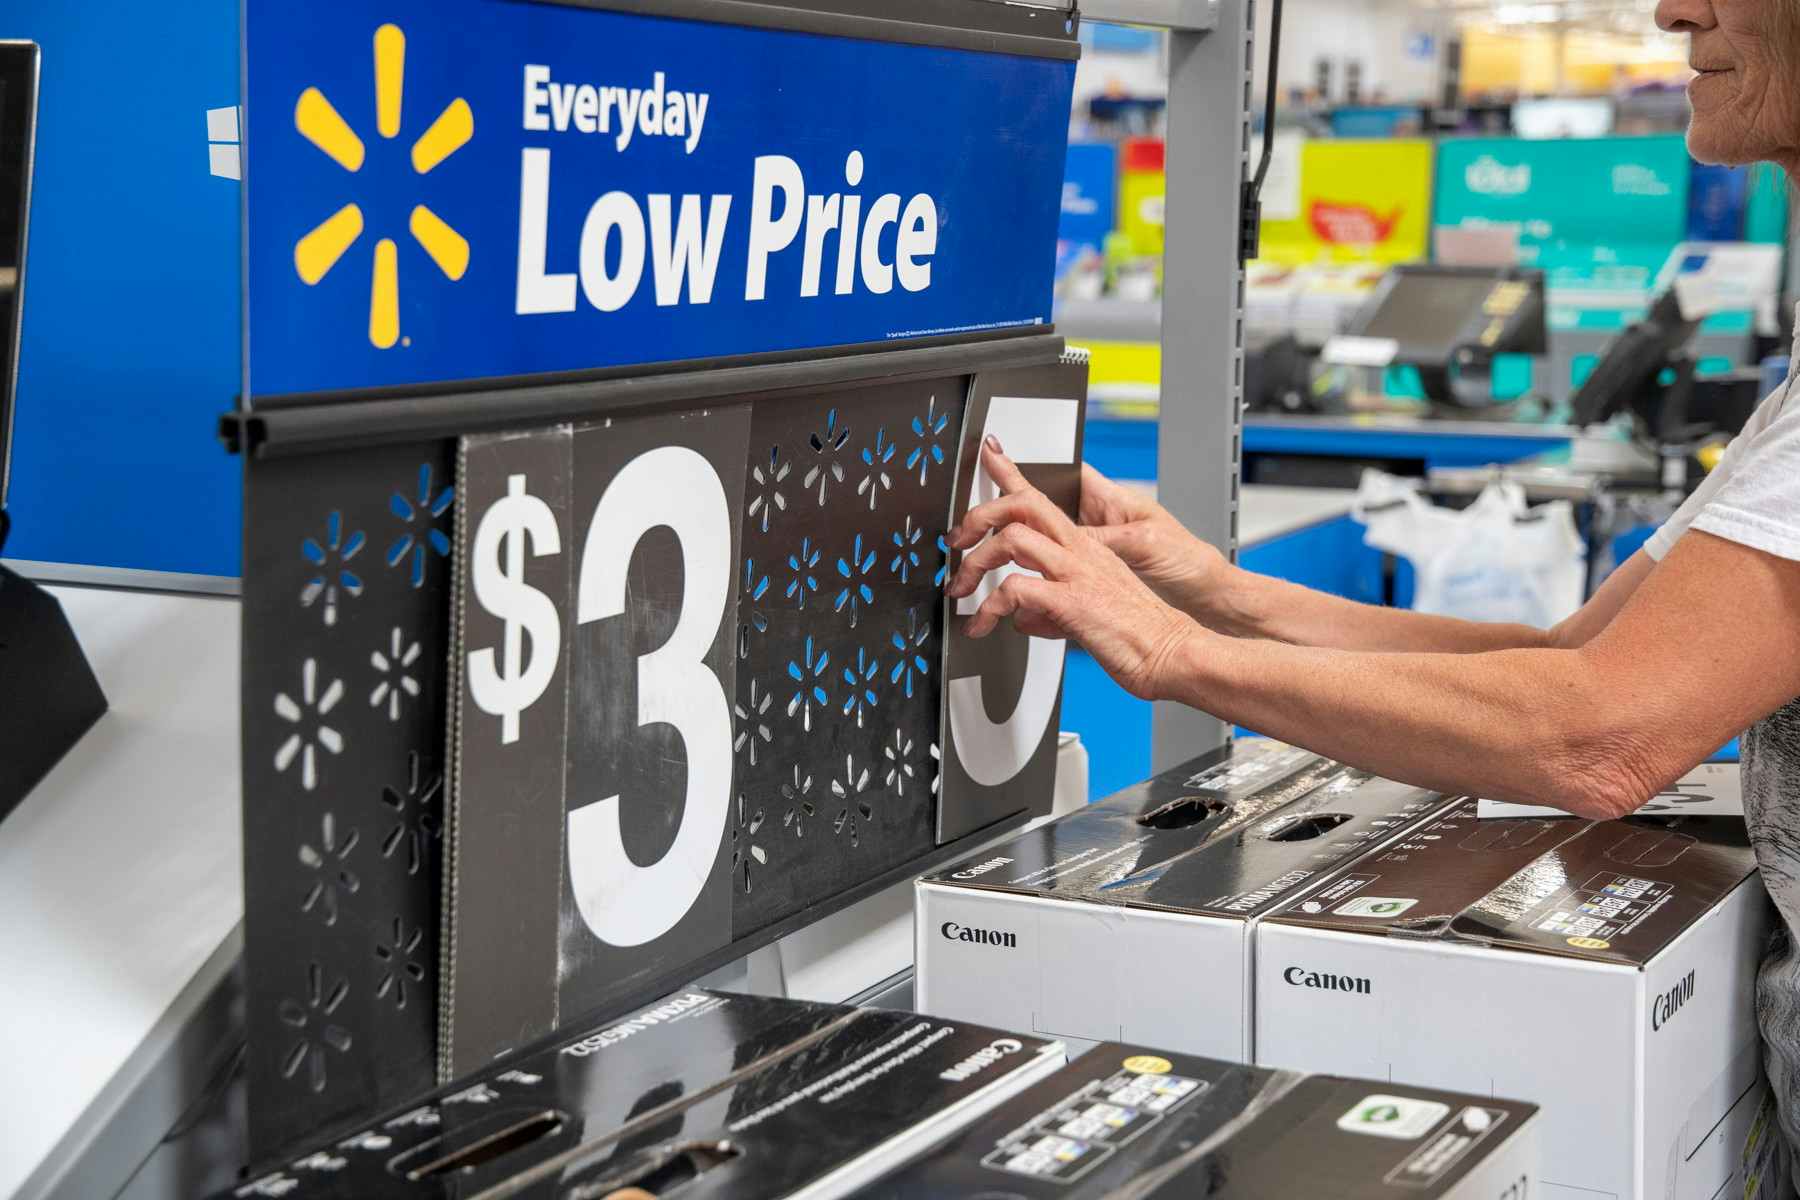 https://prod-cdn-thekrazycouponlady.imgix.net/wp-content/uploads/2019/10/20190724-kcl-how-to-save-at-walmart-heather-joanie-rollback-02-1570046888.jpg?auto=format&fit=fill&q=25